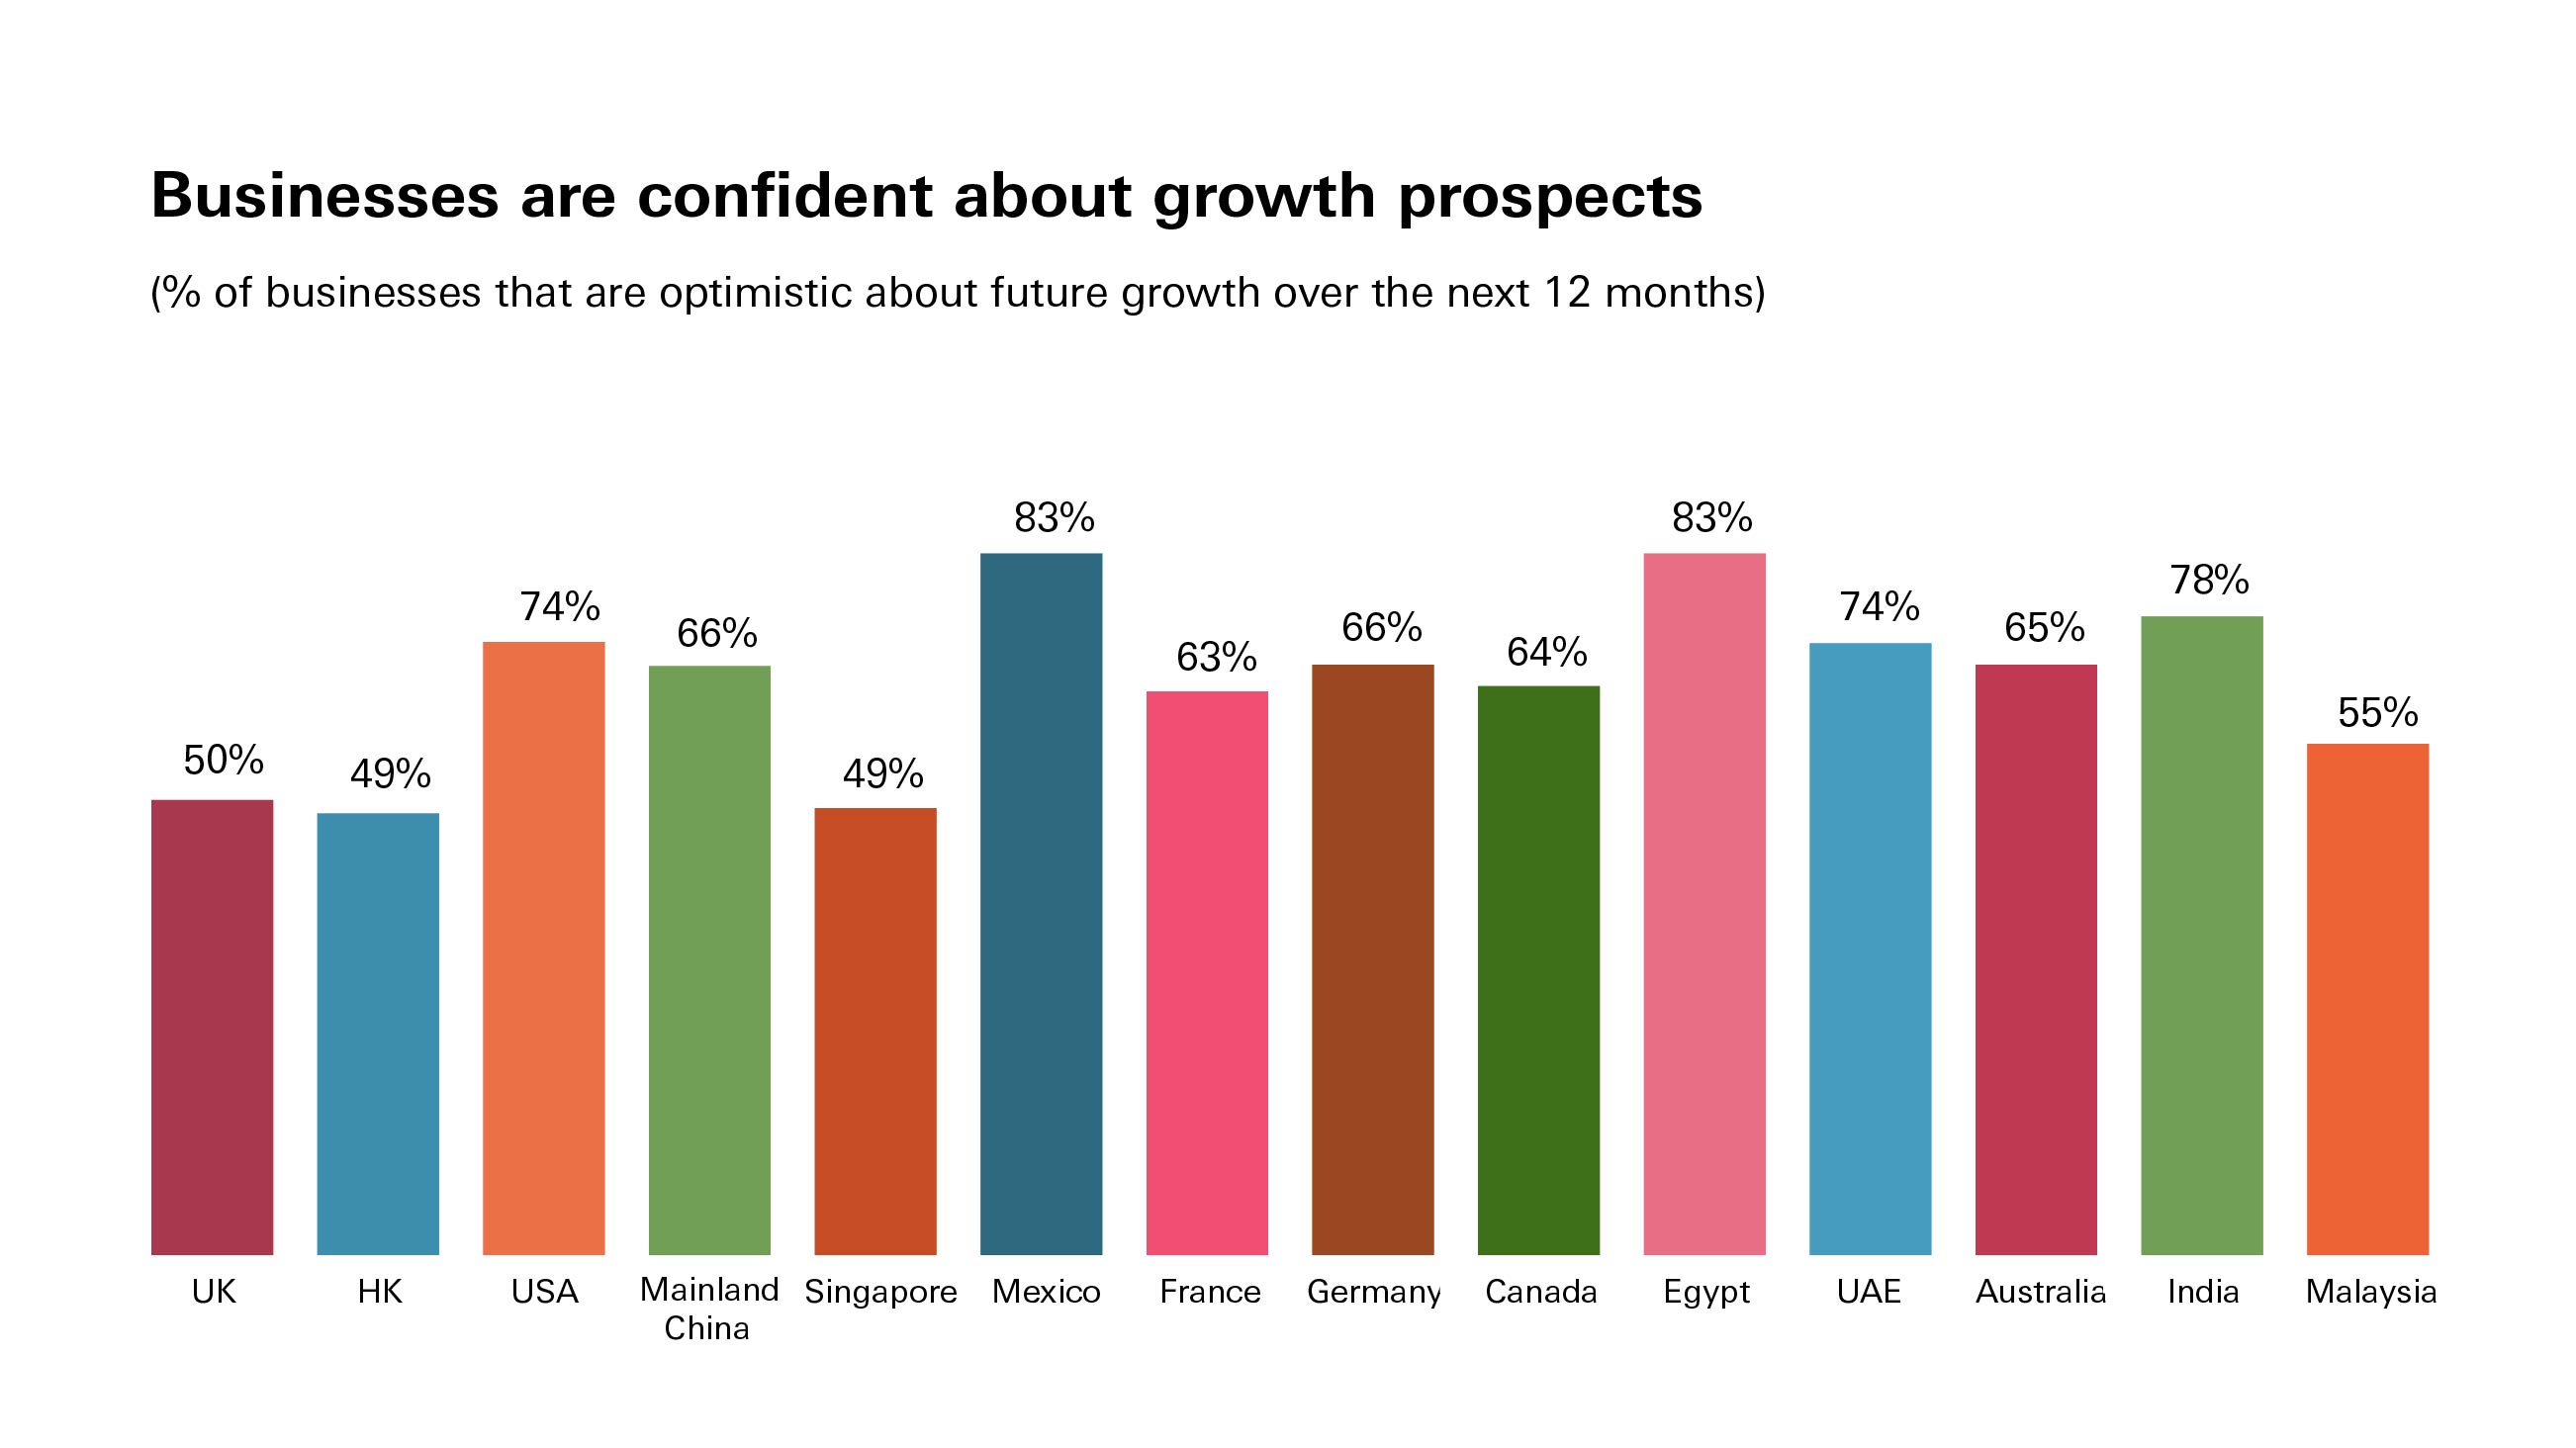 Graph showing showing how confident businesses in different regions are about growth